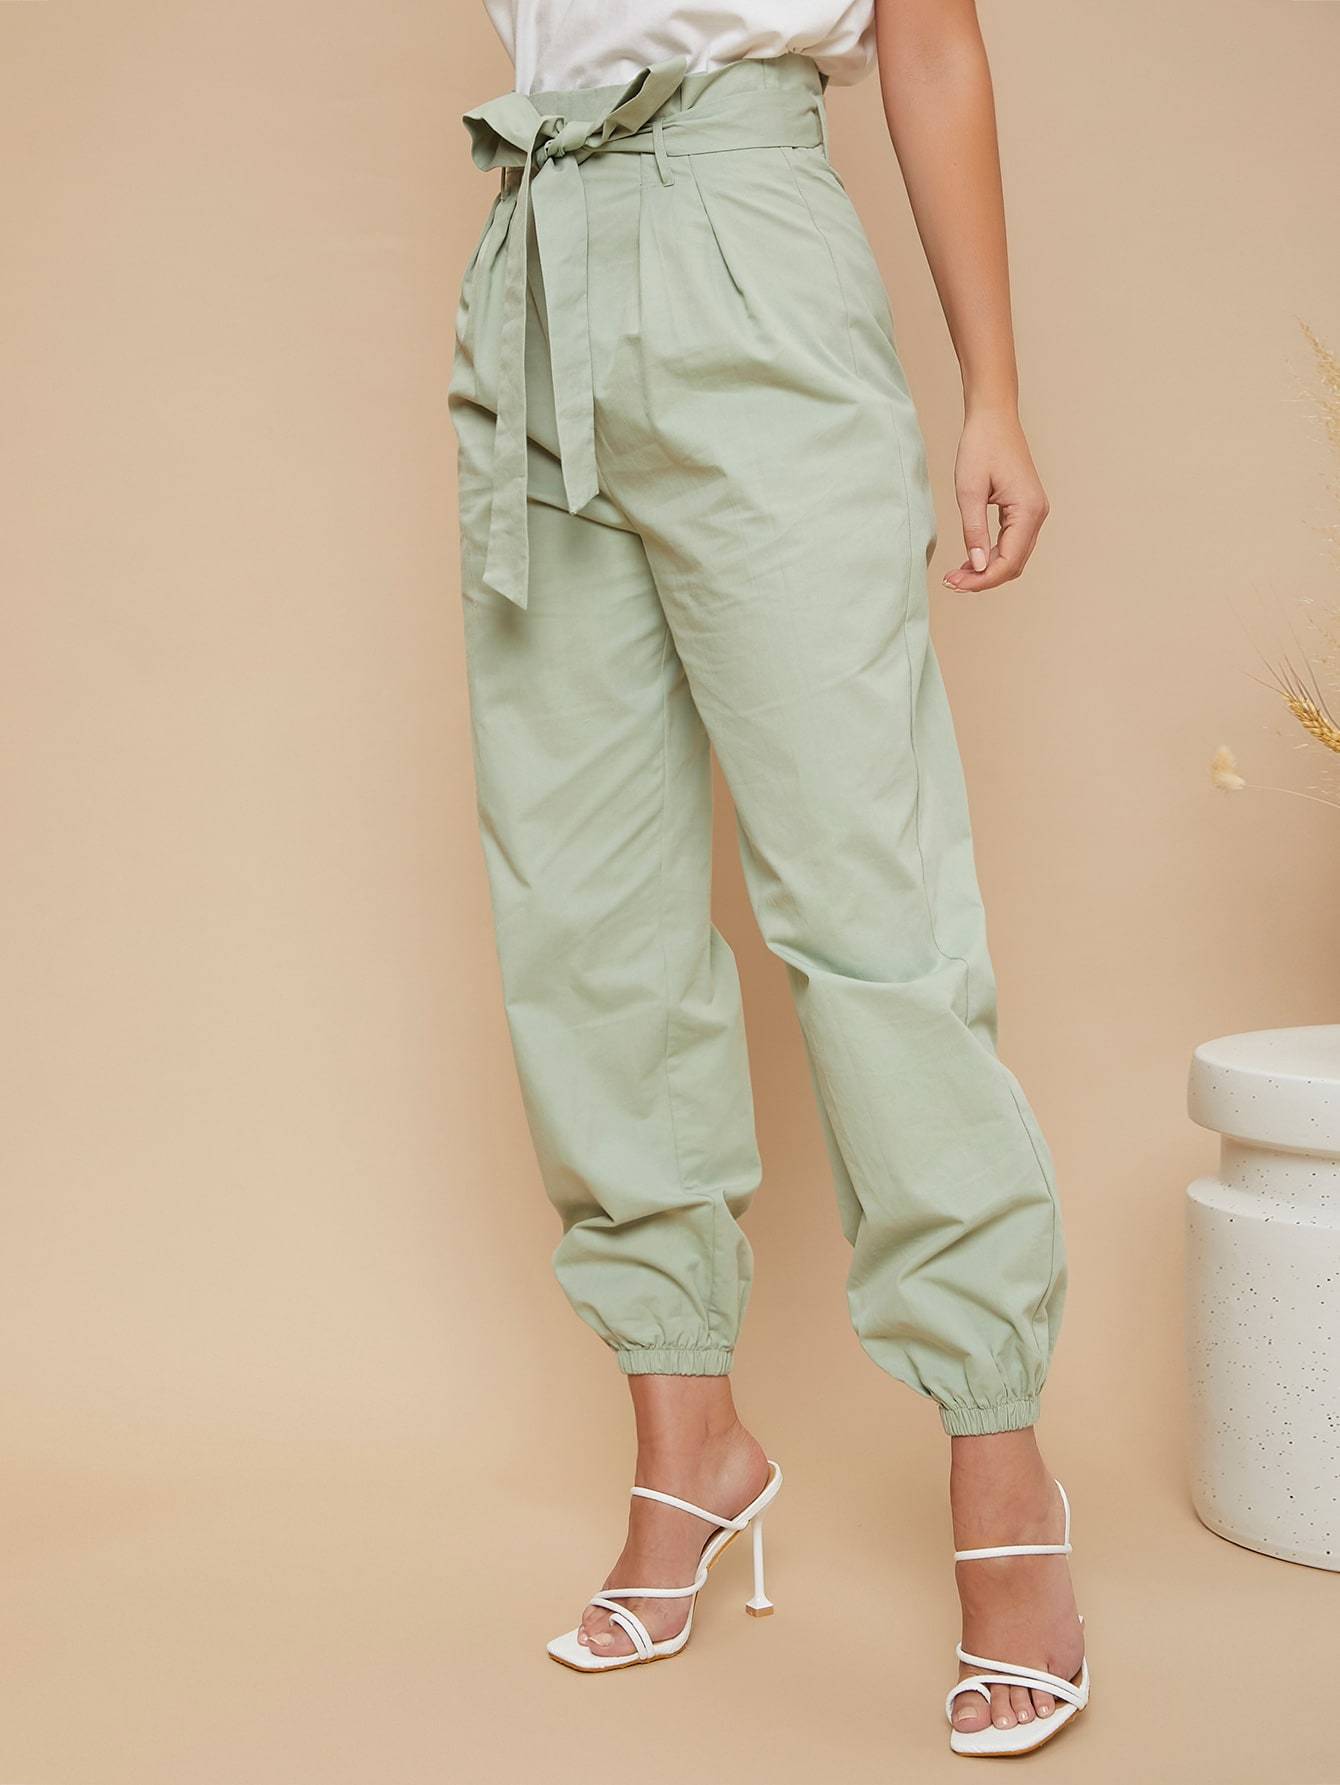 High Waist Solid Cargo Pants  Mint green pants outfit, Green